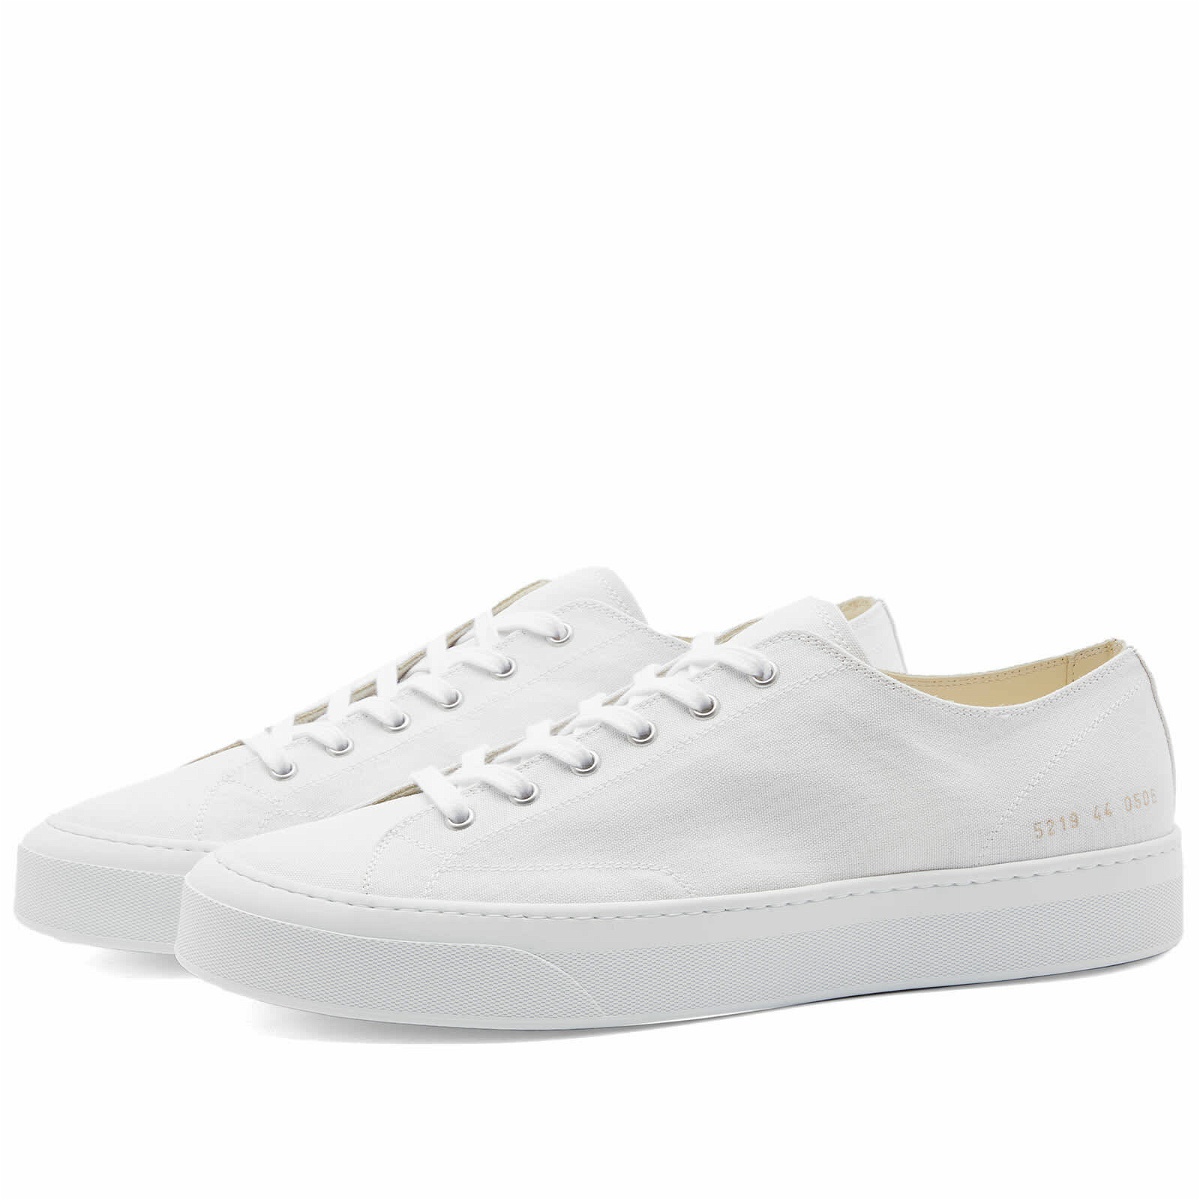 Common Projects Men's Tournament Low Classic Canvas Sneakers in White ...